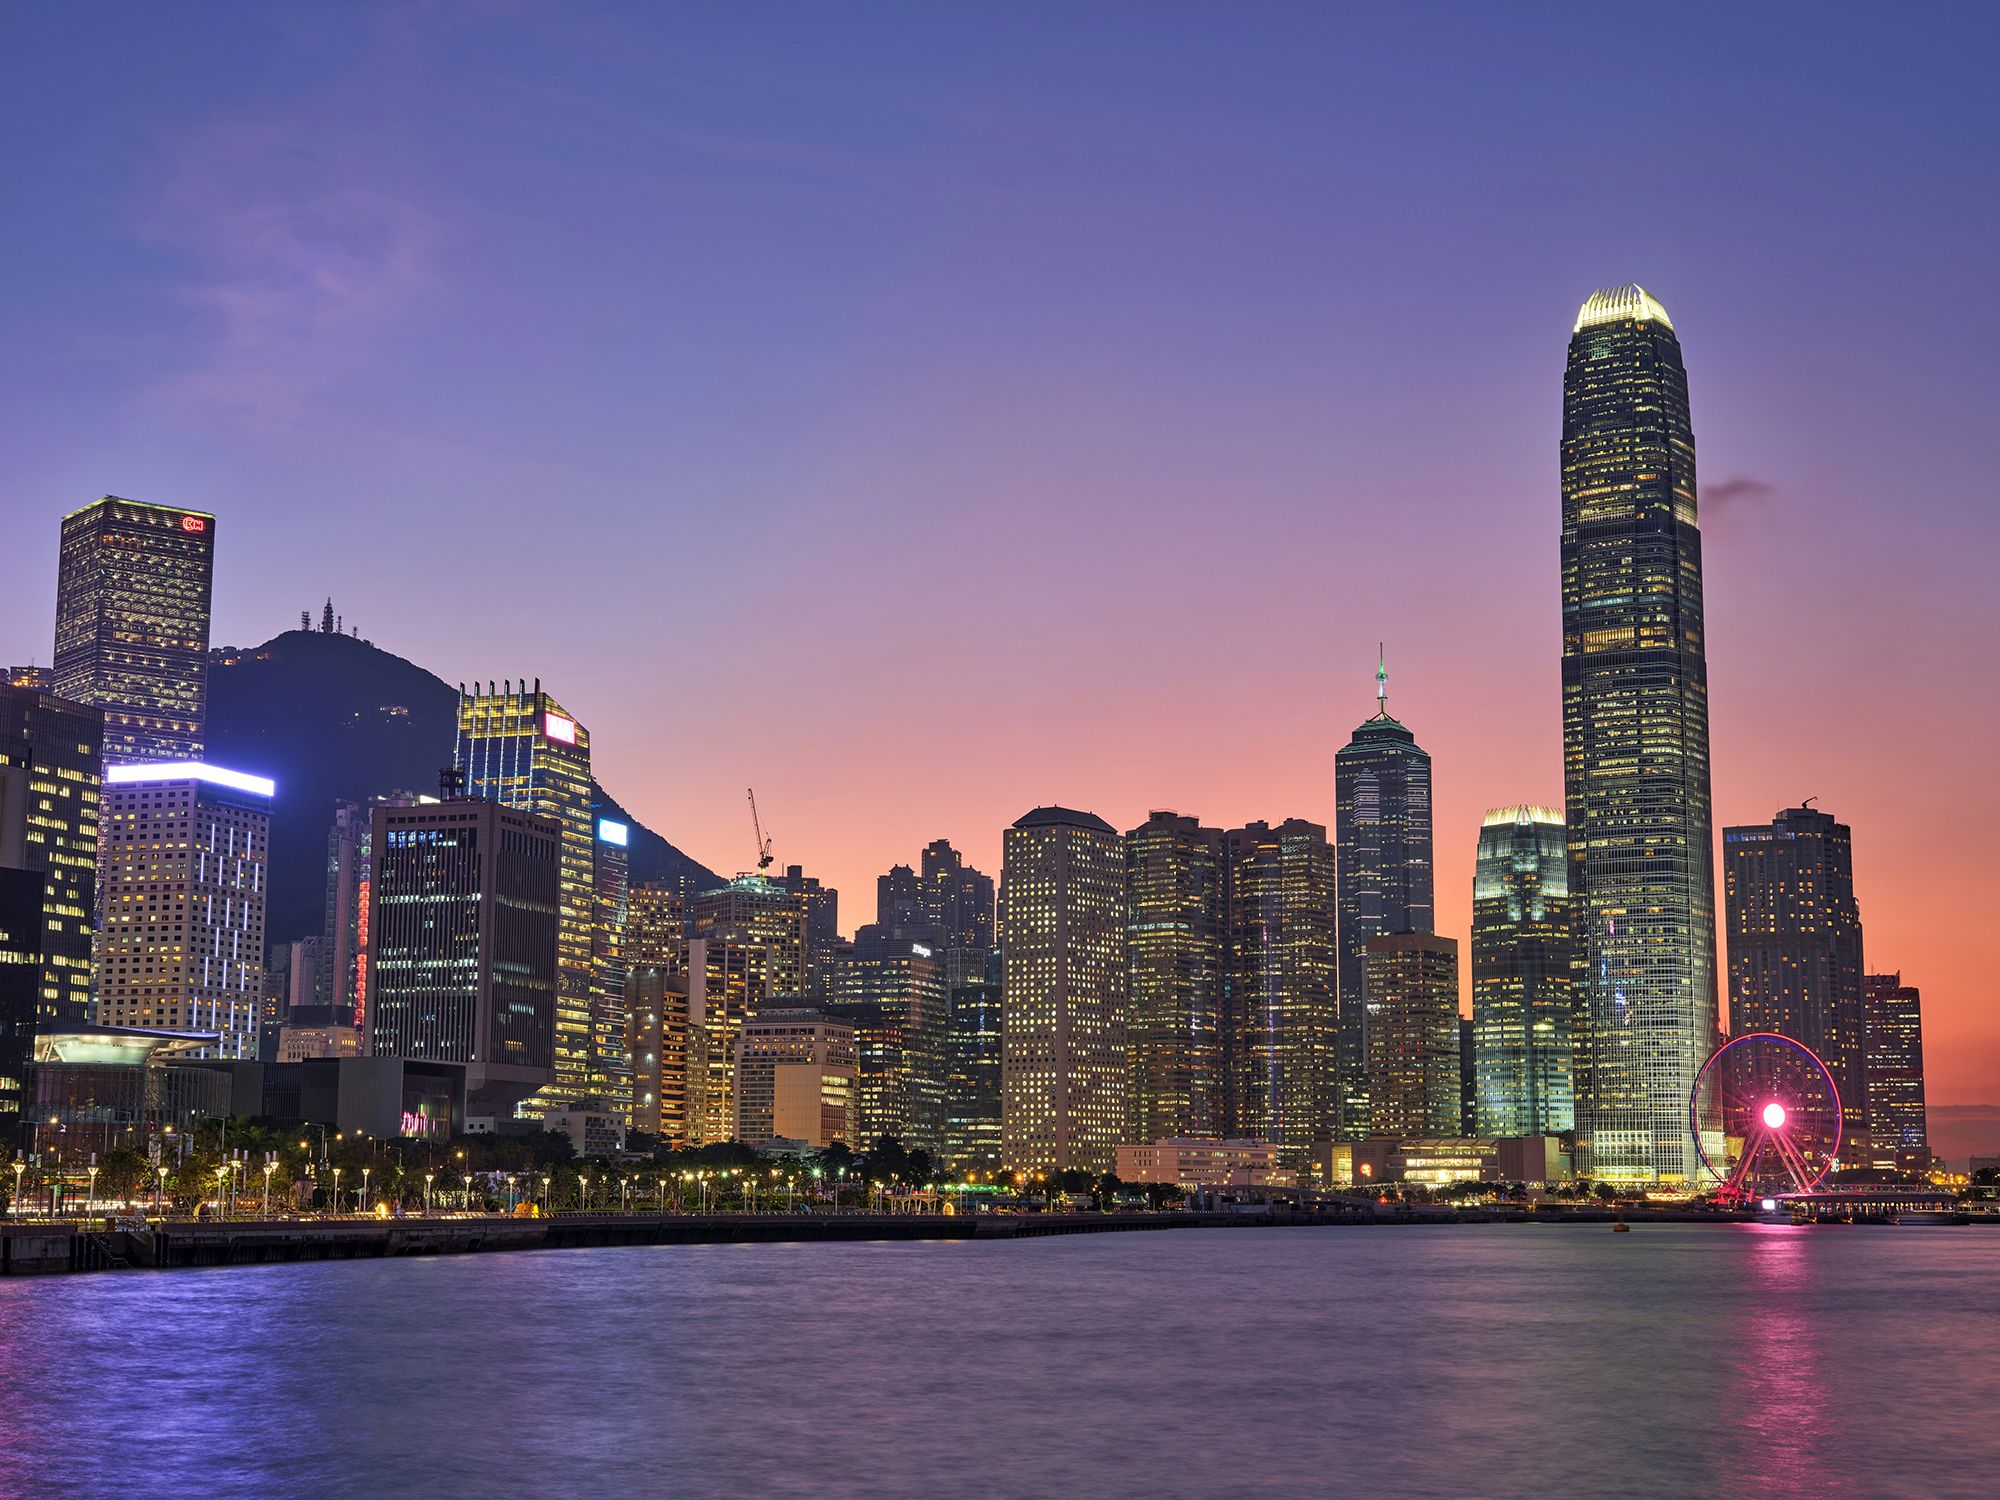 Victoria Harbour is a unique brand of Hong Kong, with its night view recognised as one of the best three night views in the world. 